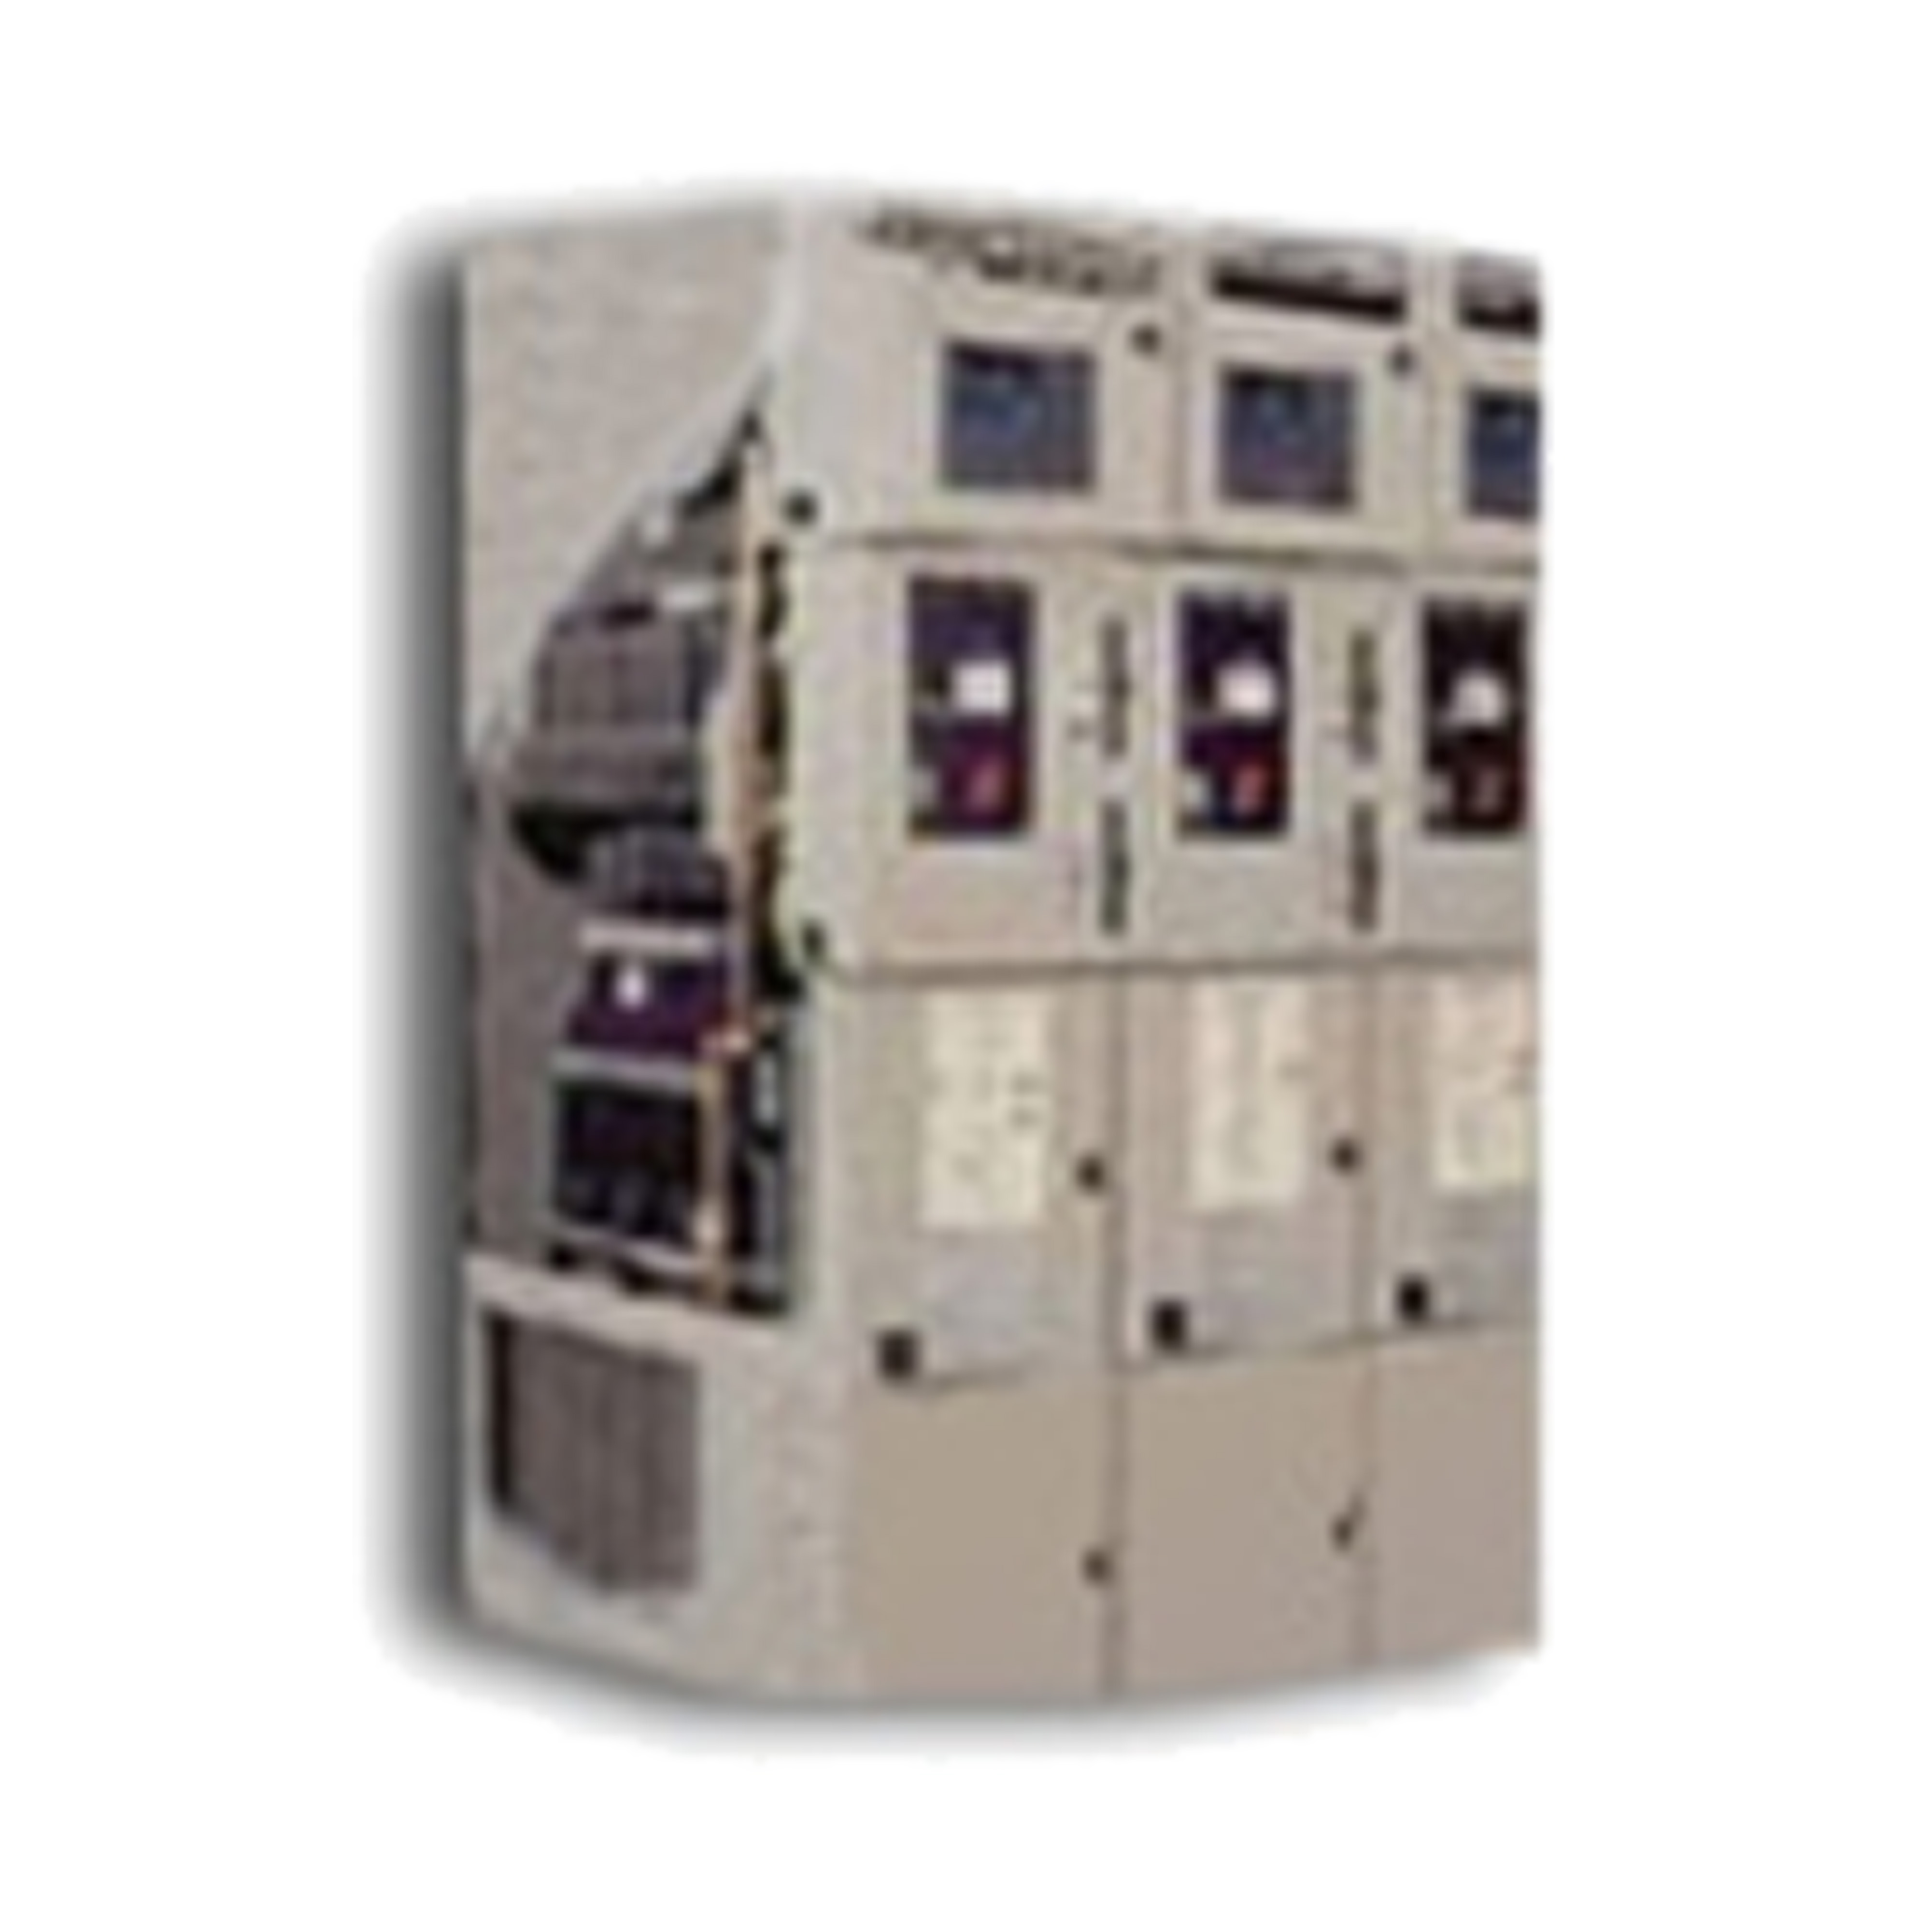 GM6 Schneider Electric GIS MV primary switchboard up to 40.5 kV